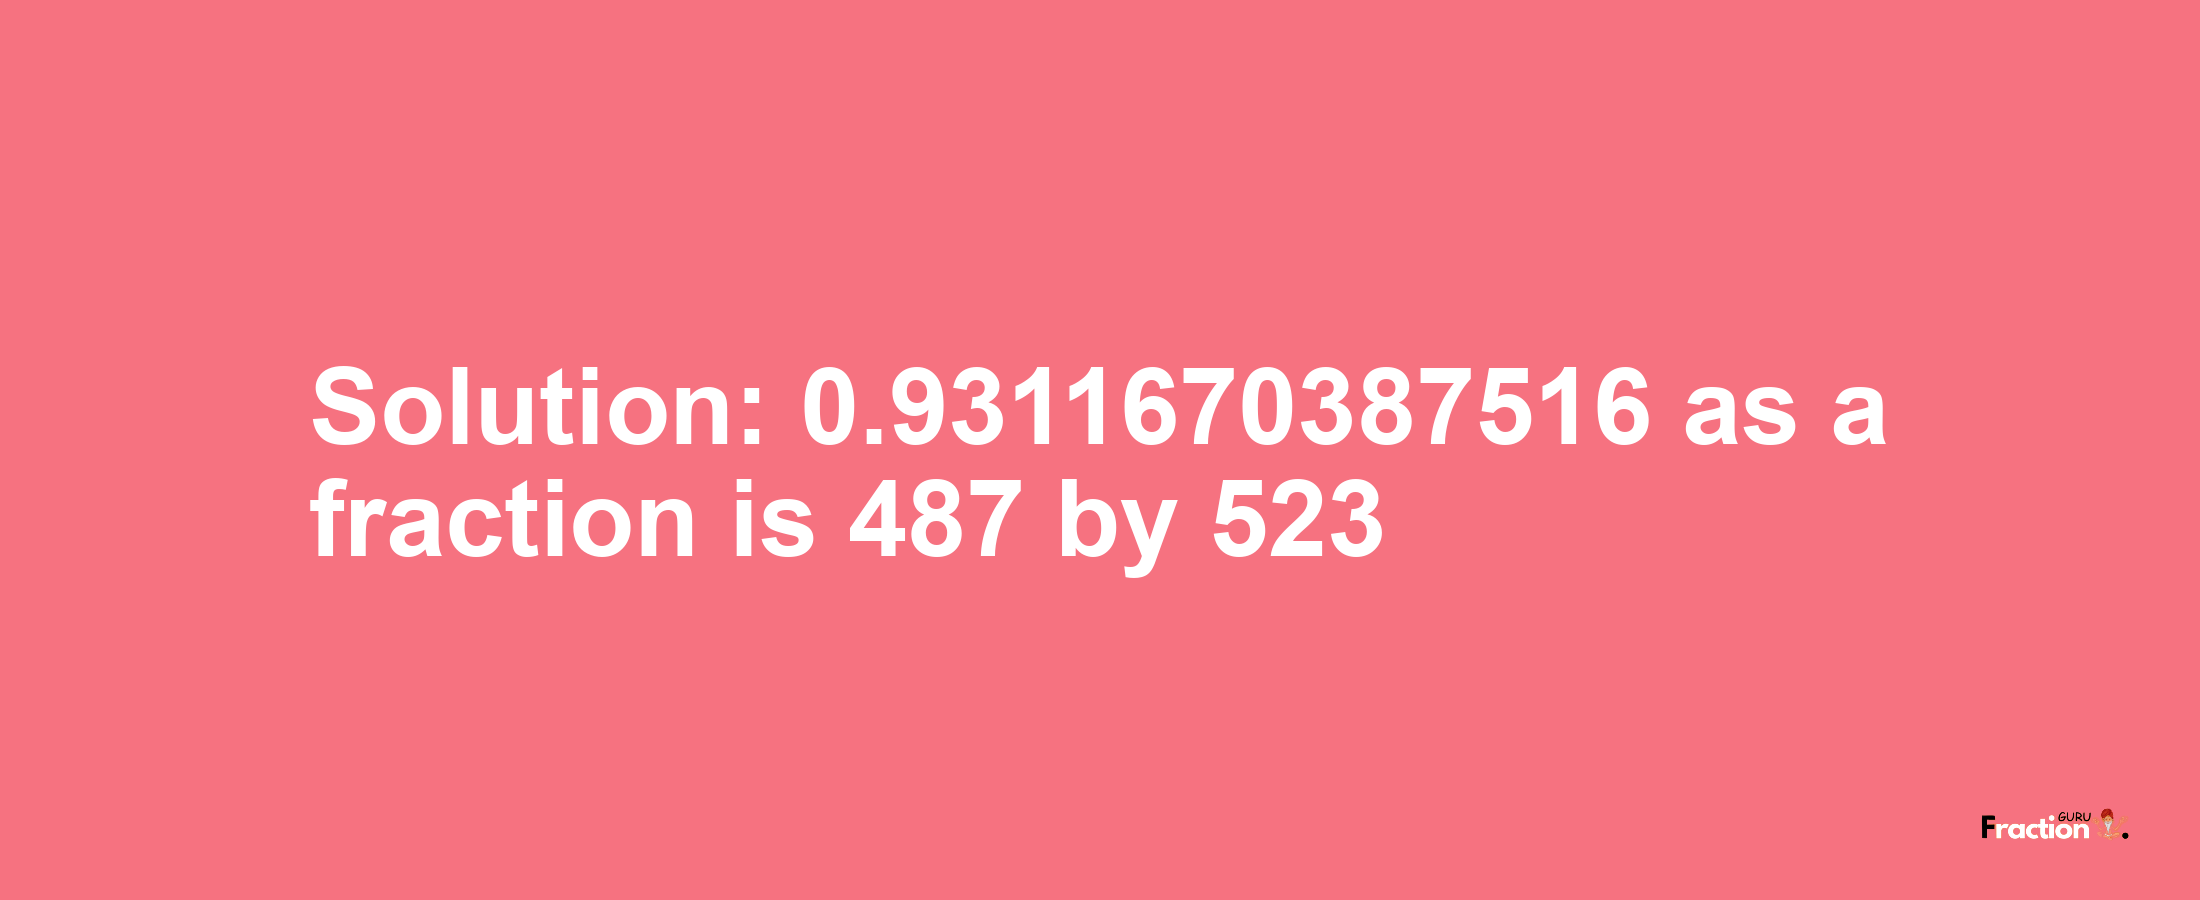 Solution:0.9311670387516 as a fraction is 487/523